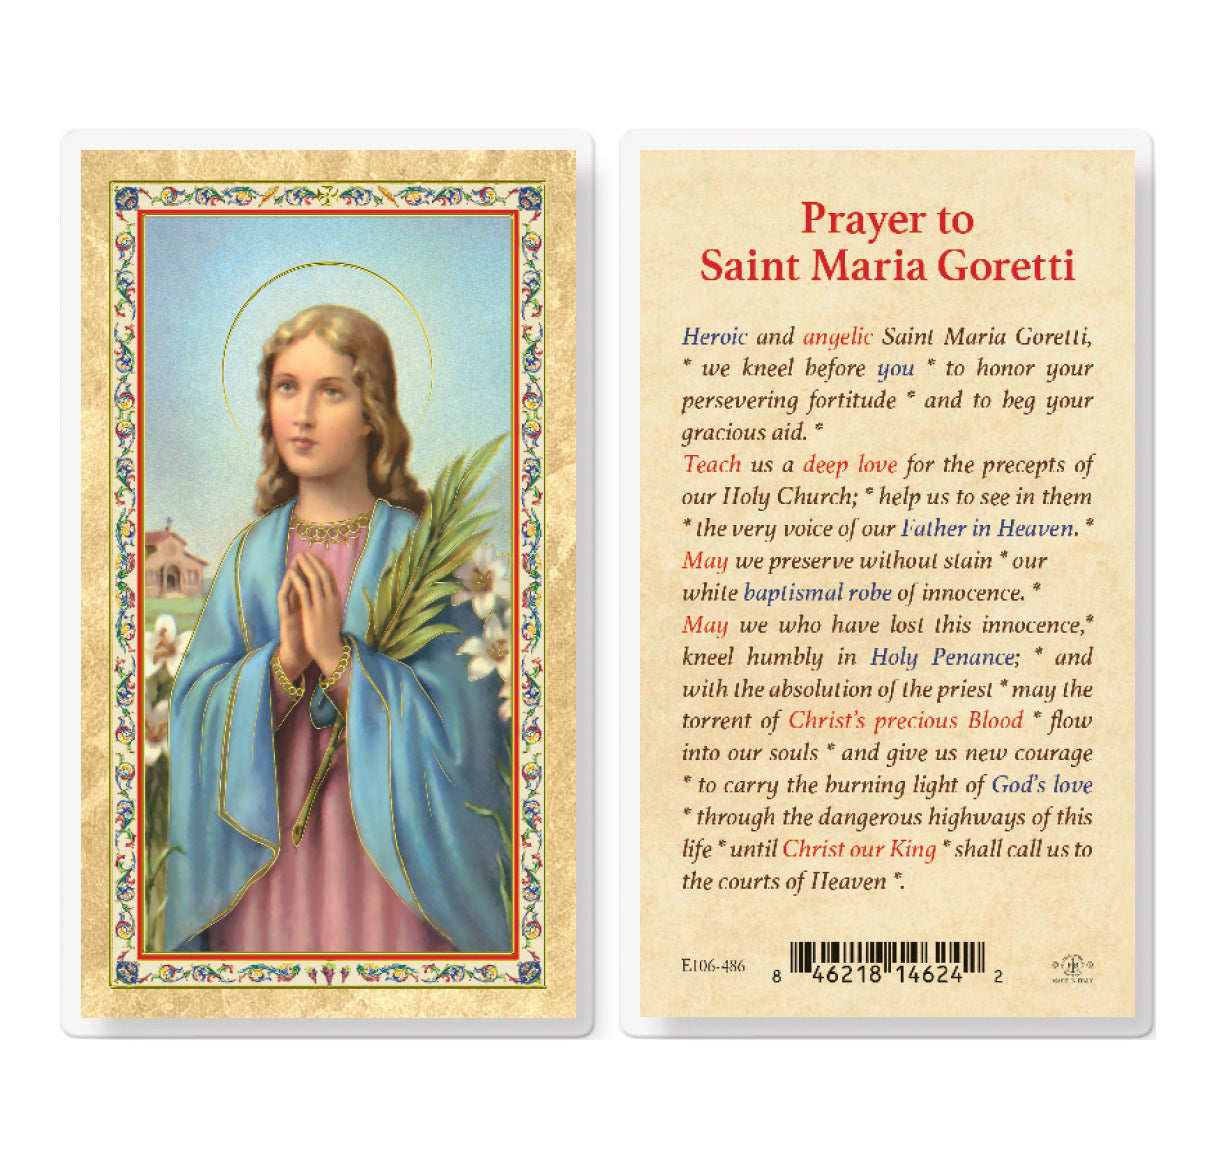 Prayer to St. Maria Goretti Gold-Stamped Laminated Catholic Prayer Holy Card with Prayer on Back, Pack of 25